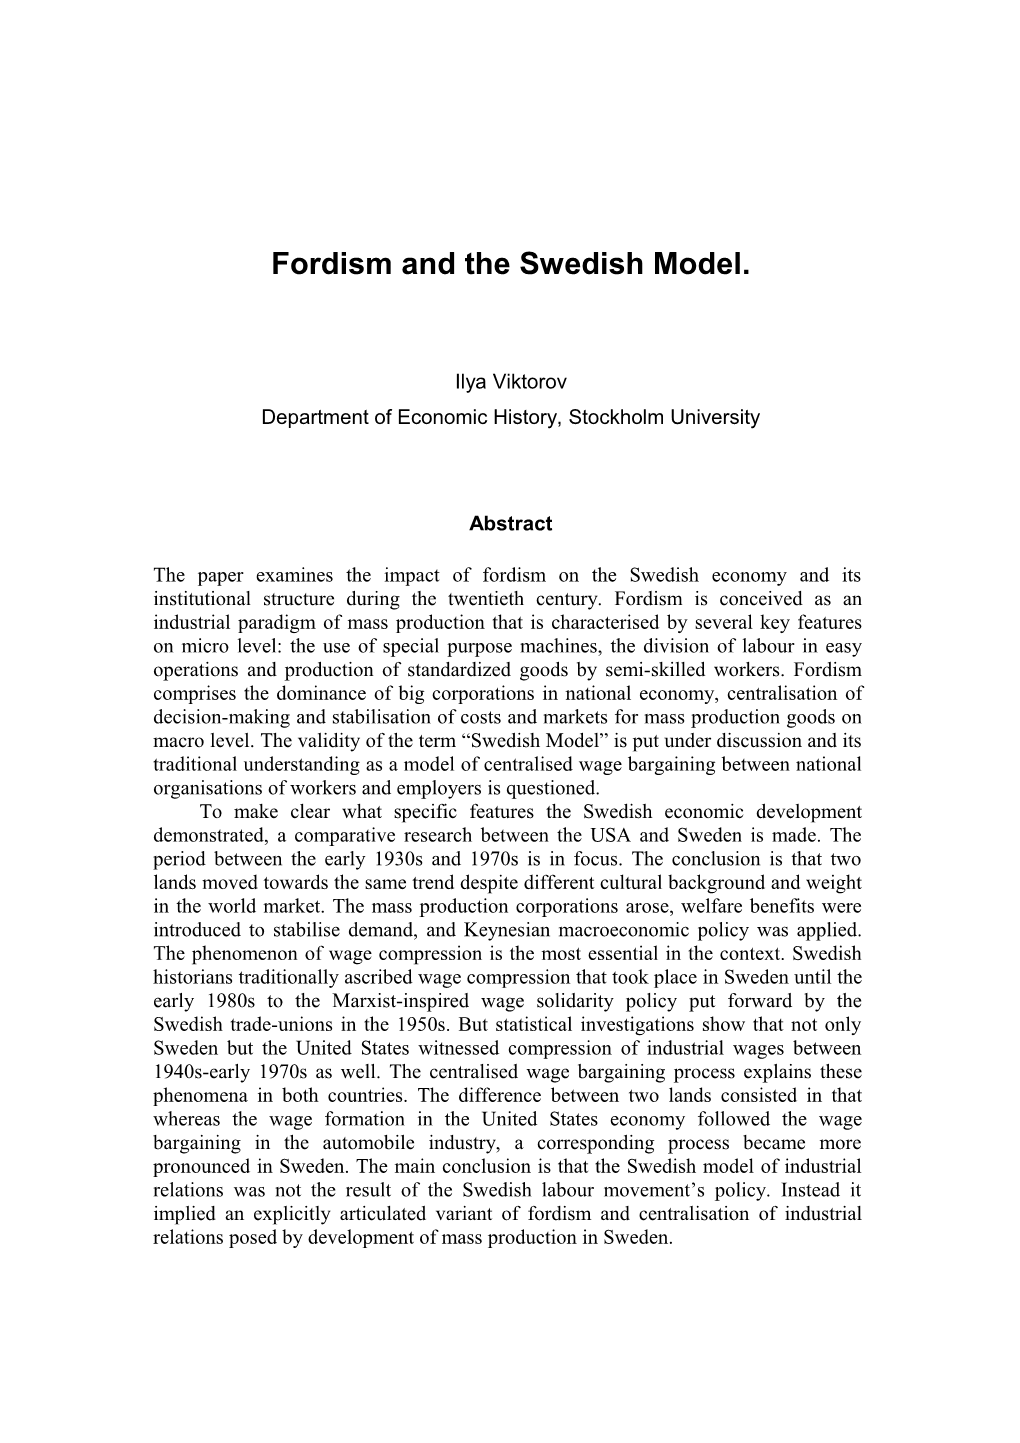 Fordism and the Swedish Model